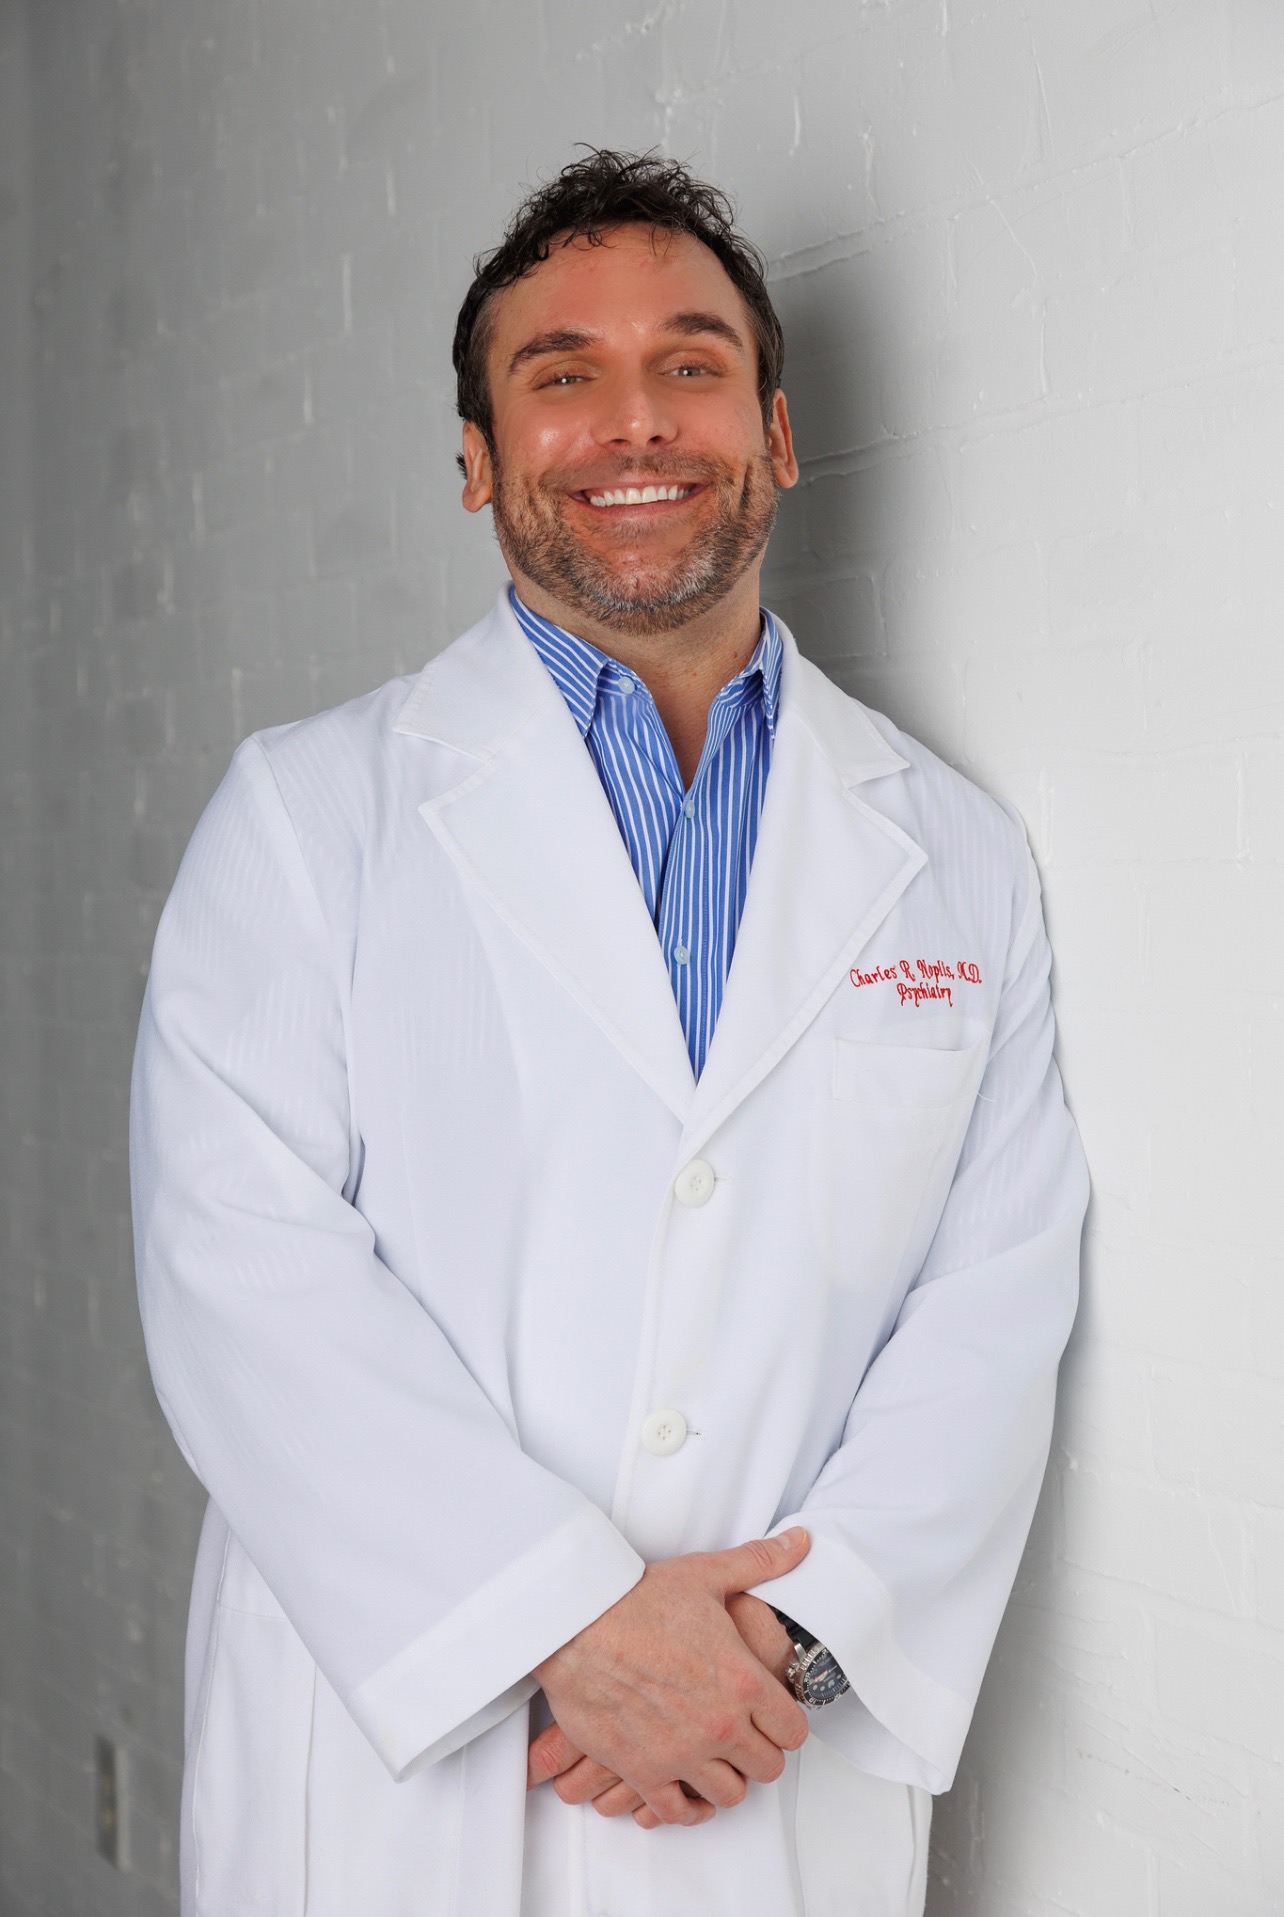 Know more about Dr Charles Noplis